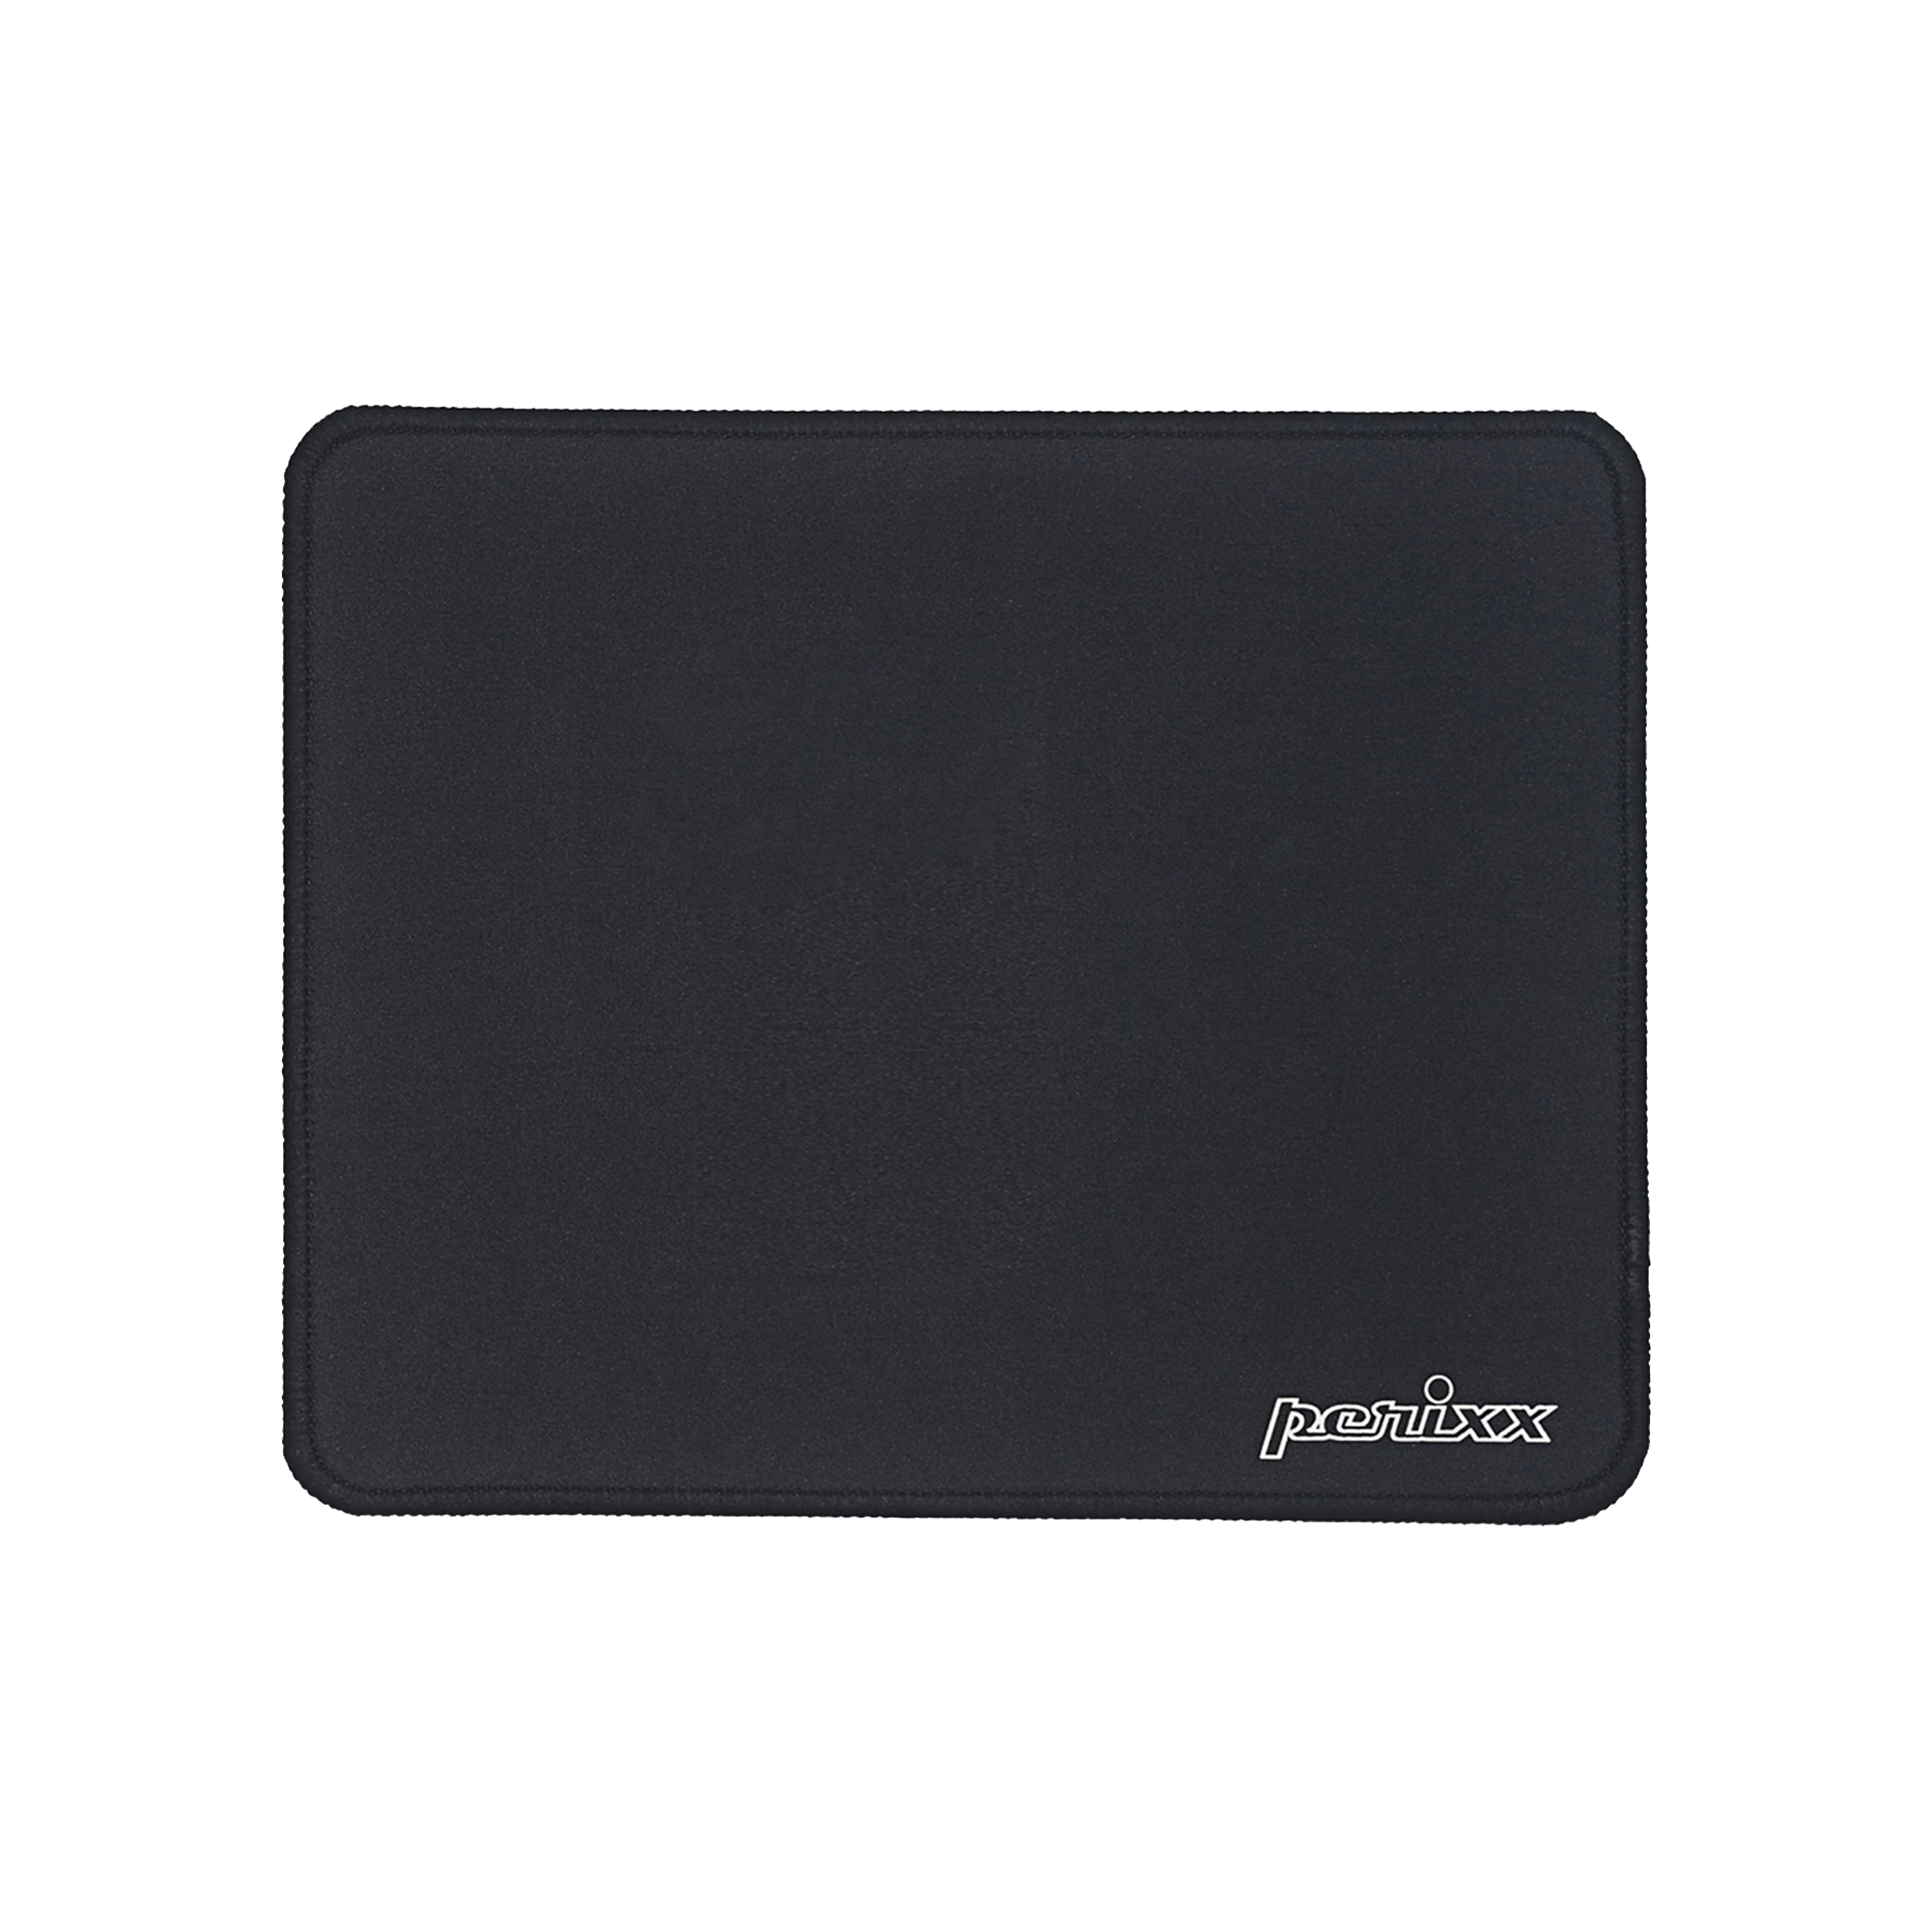 DX-1000 - Mouse Pad Stitched Edges Waterproof (XL) - Perixx Europe